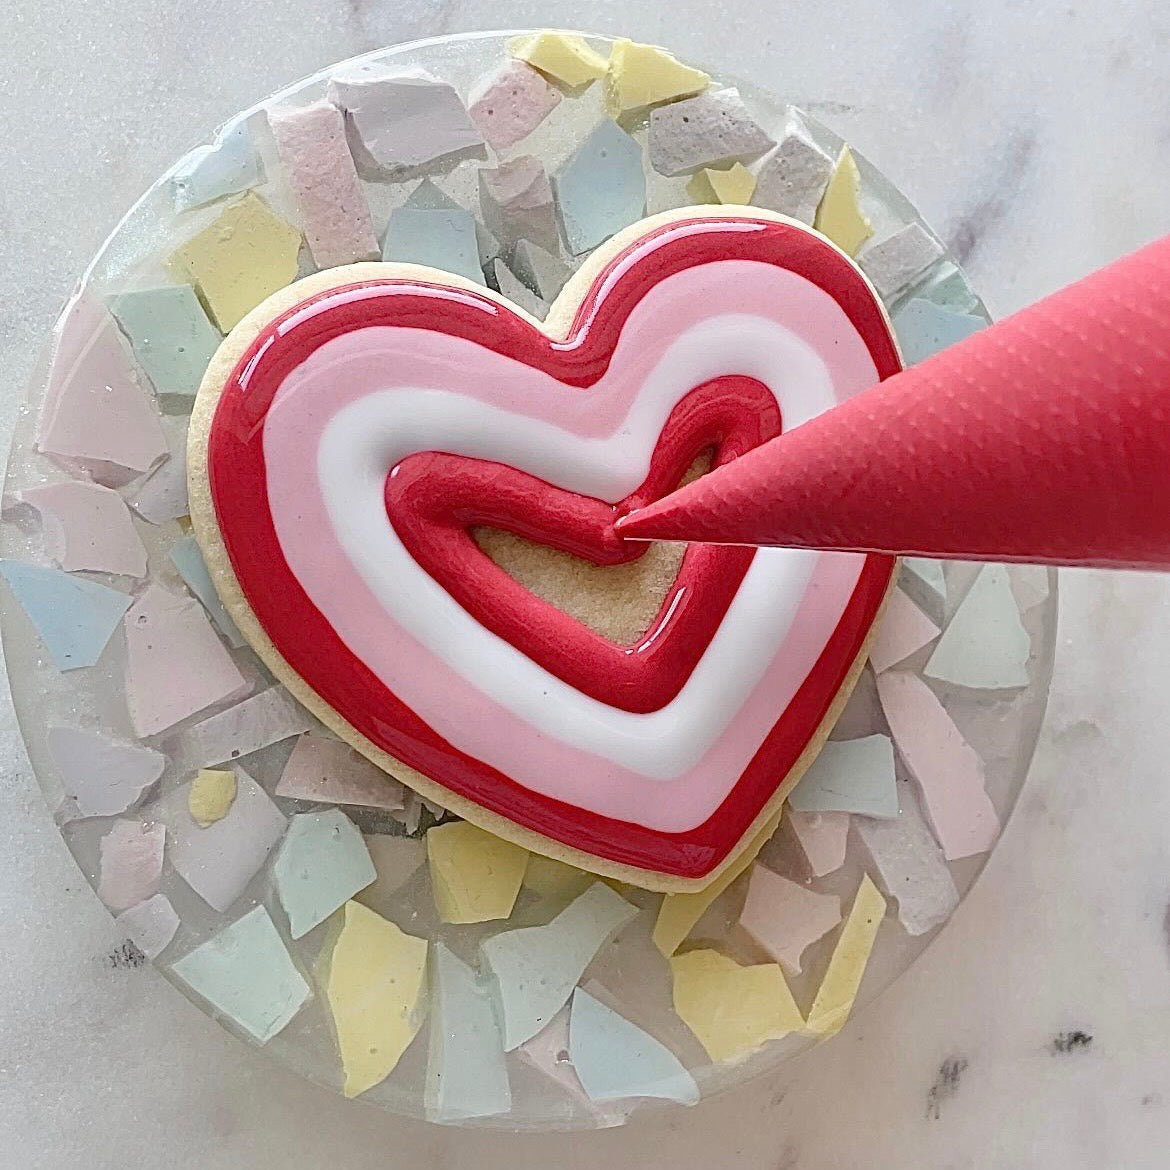 Cake Decorating turntable with a heart shaped cookie on it.